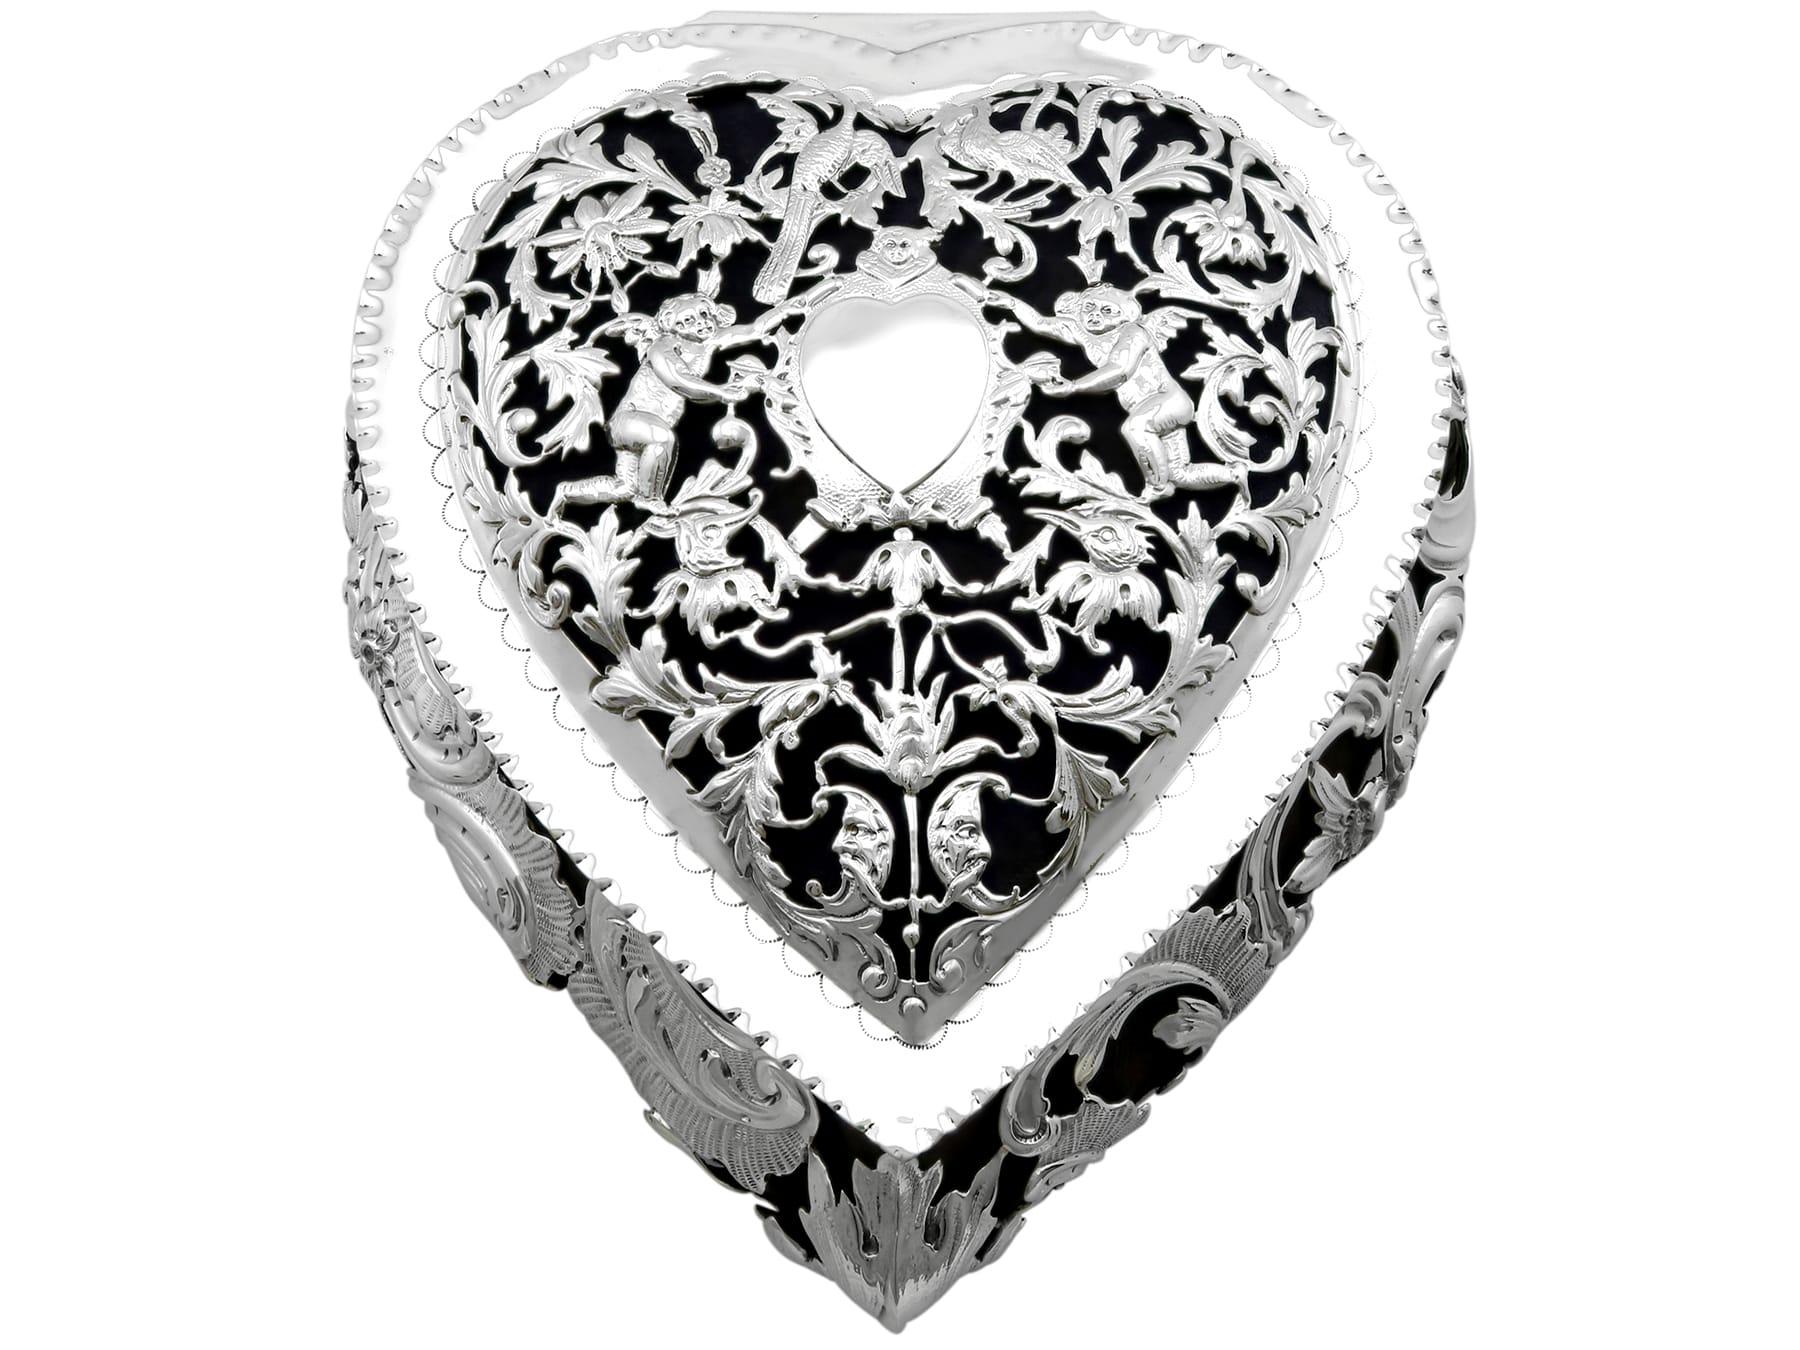 Late 19th Century Antique Victorian Sterling Silver Heart Jewellery Box (1889) For Sale